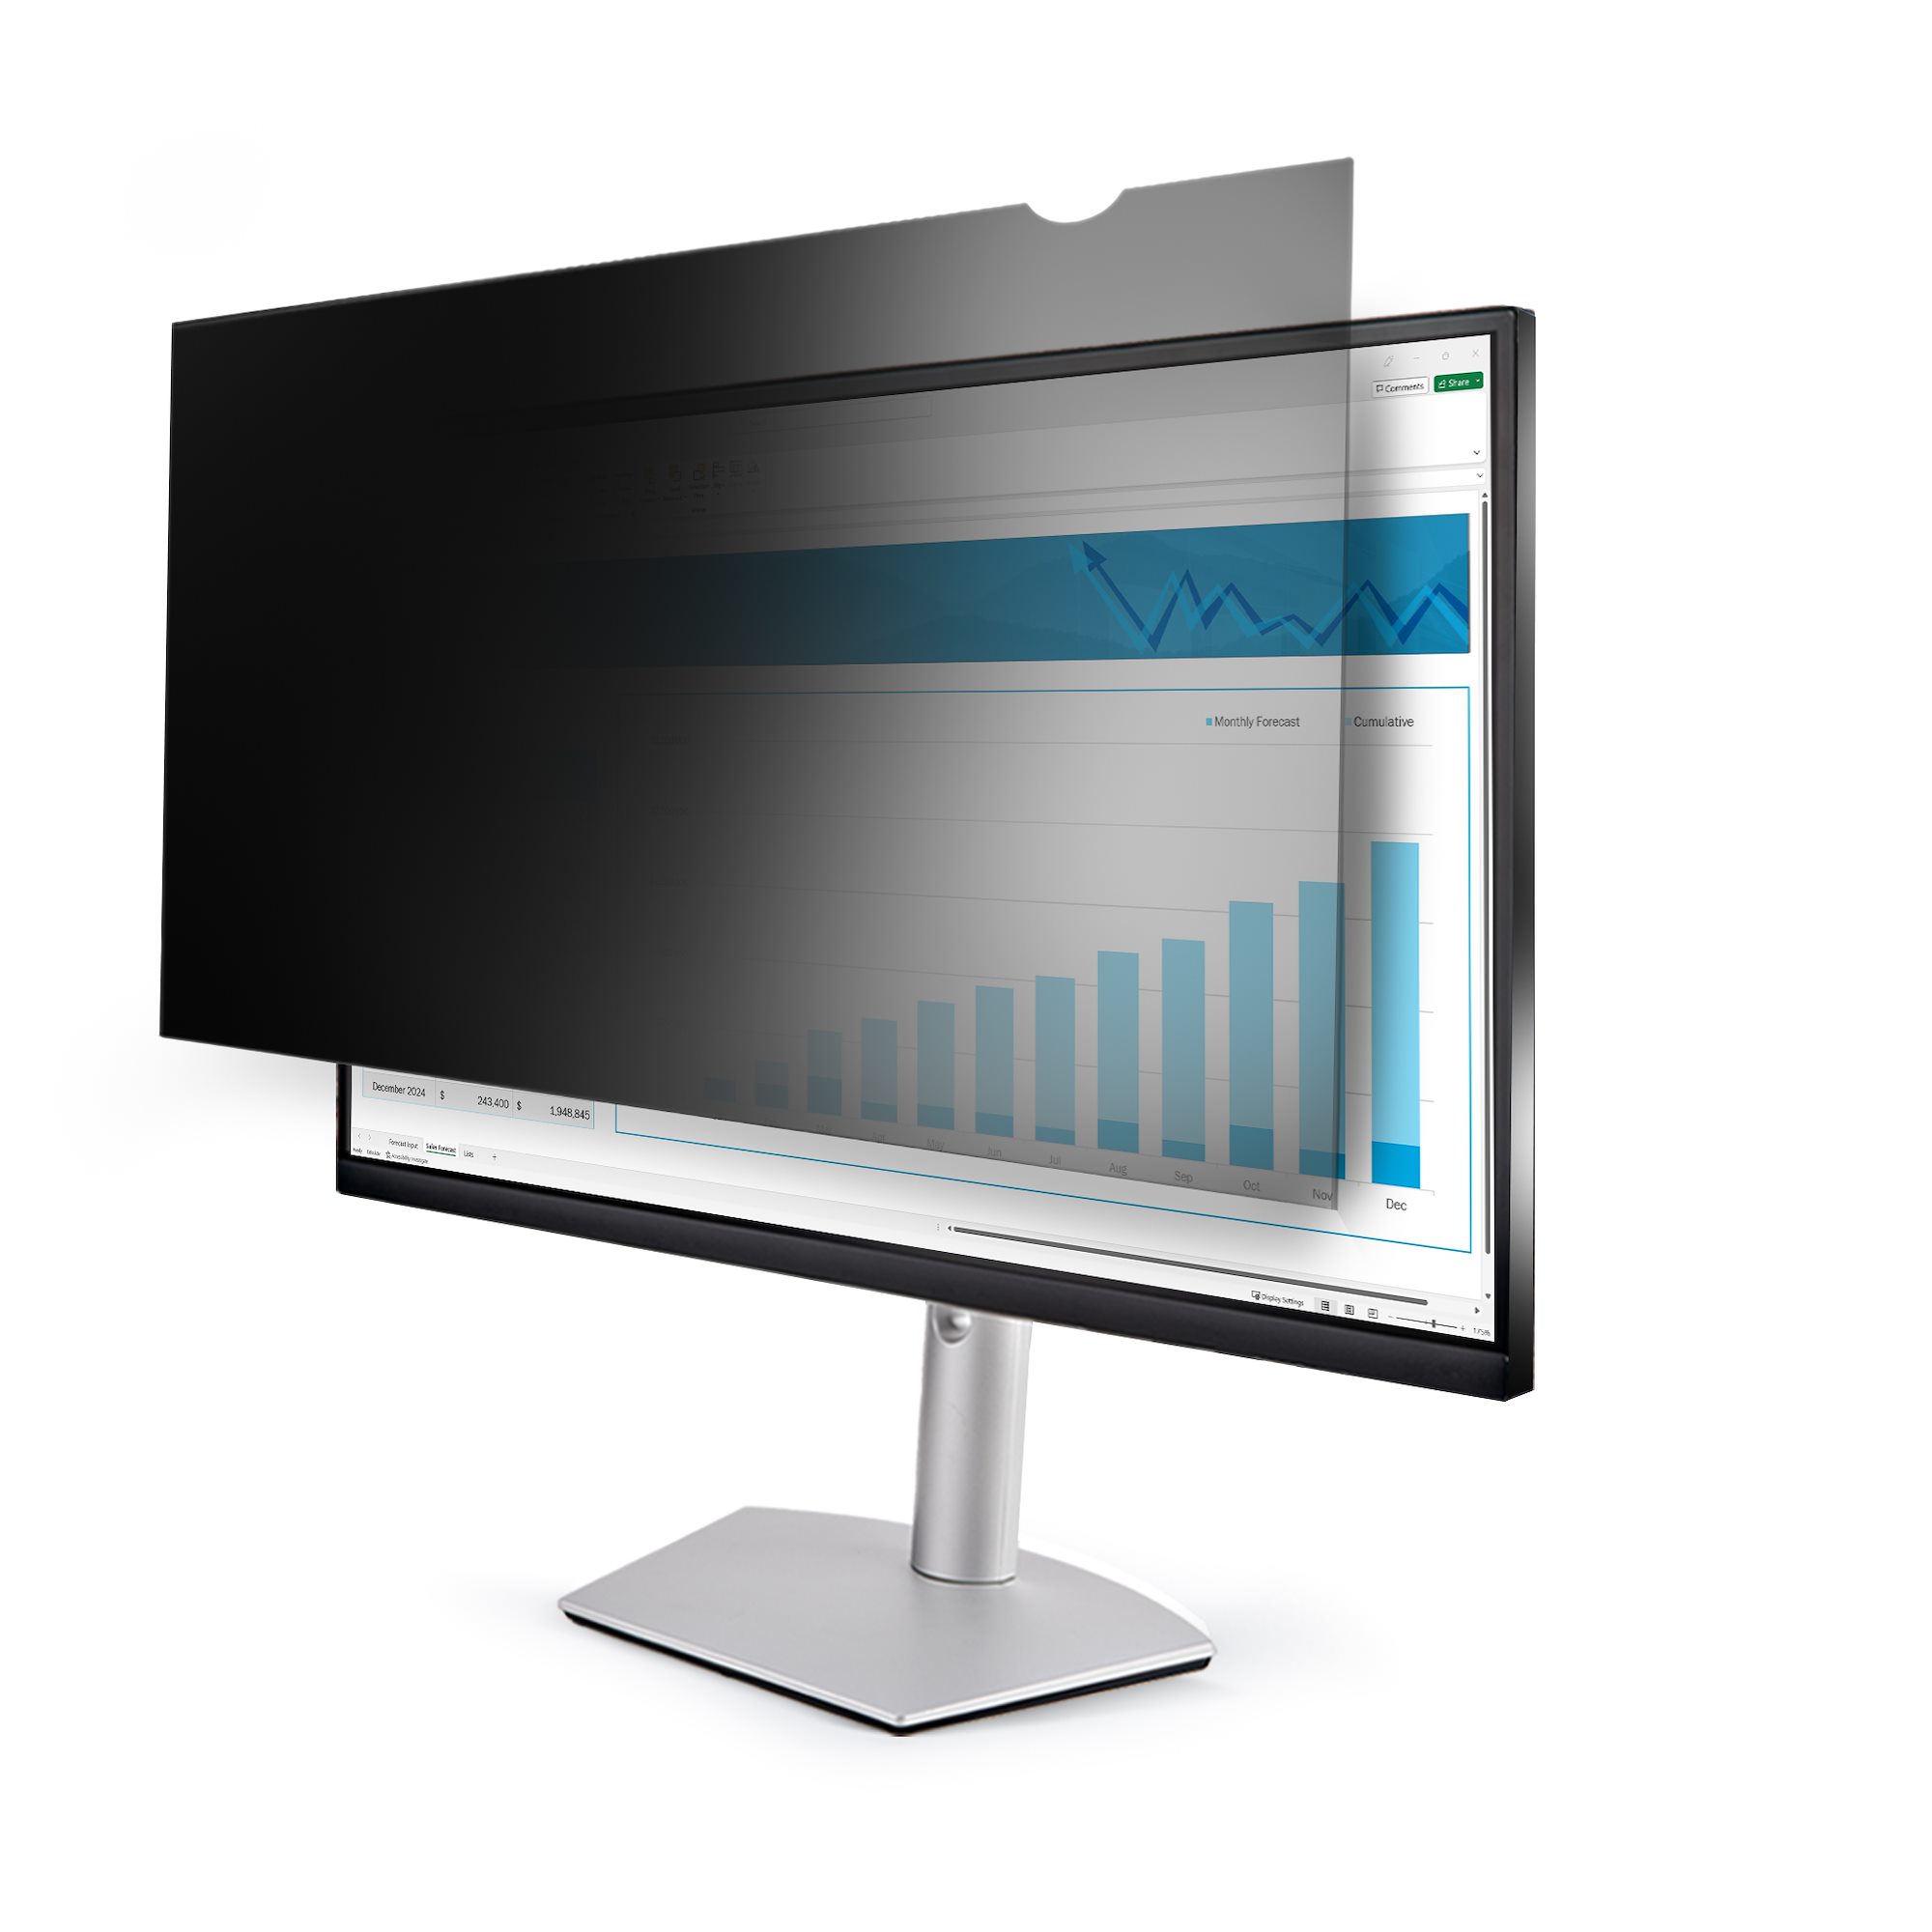 Privacy Screen Filter for 27 Inches Desktop Computer Widescreen Monitor 